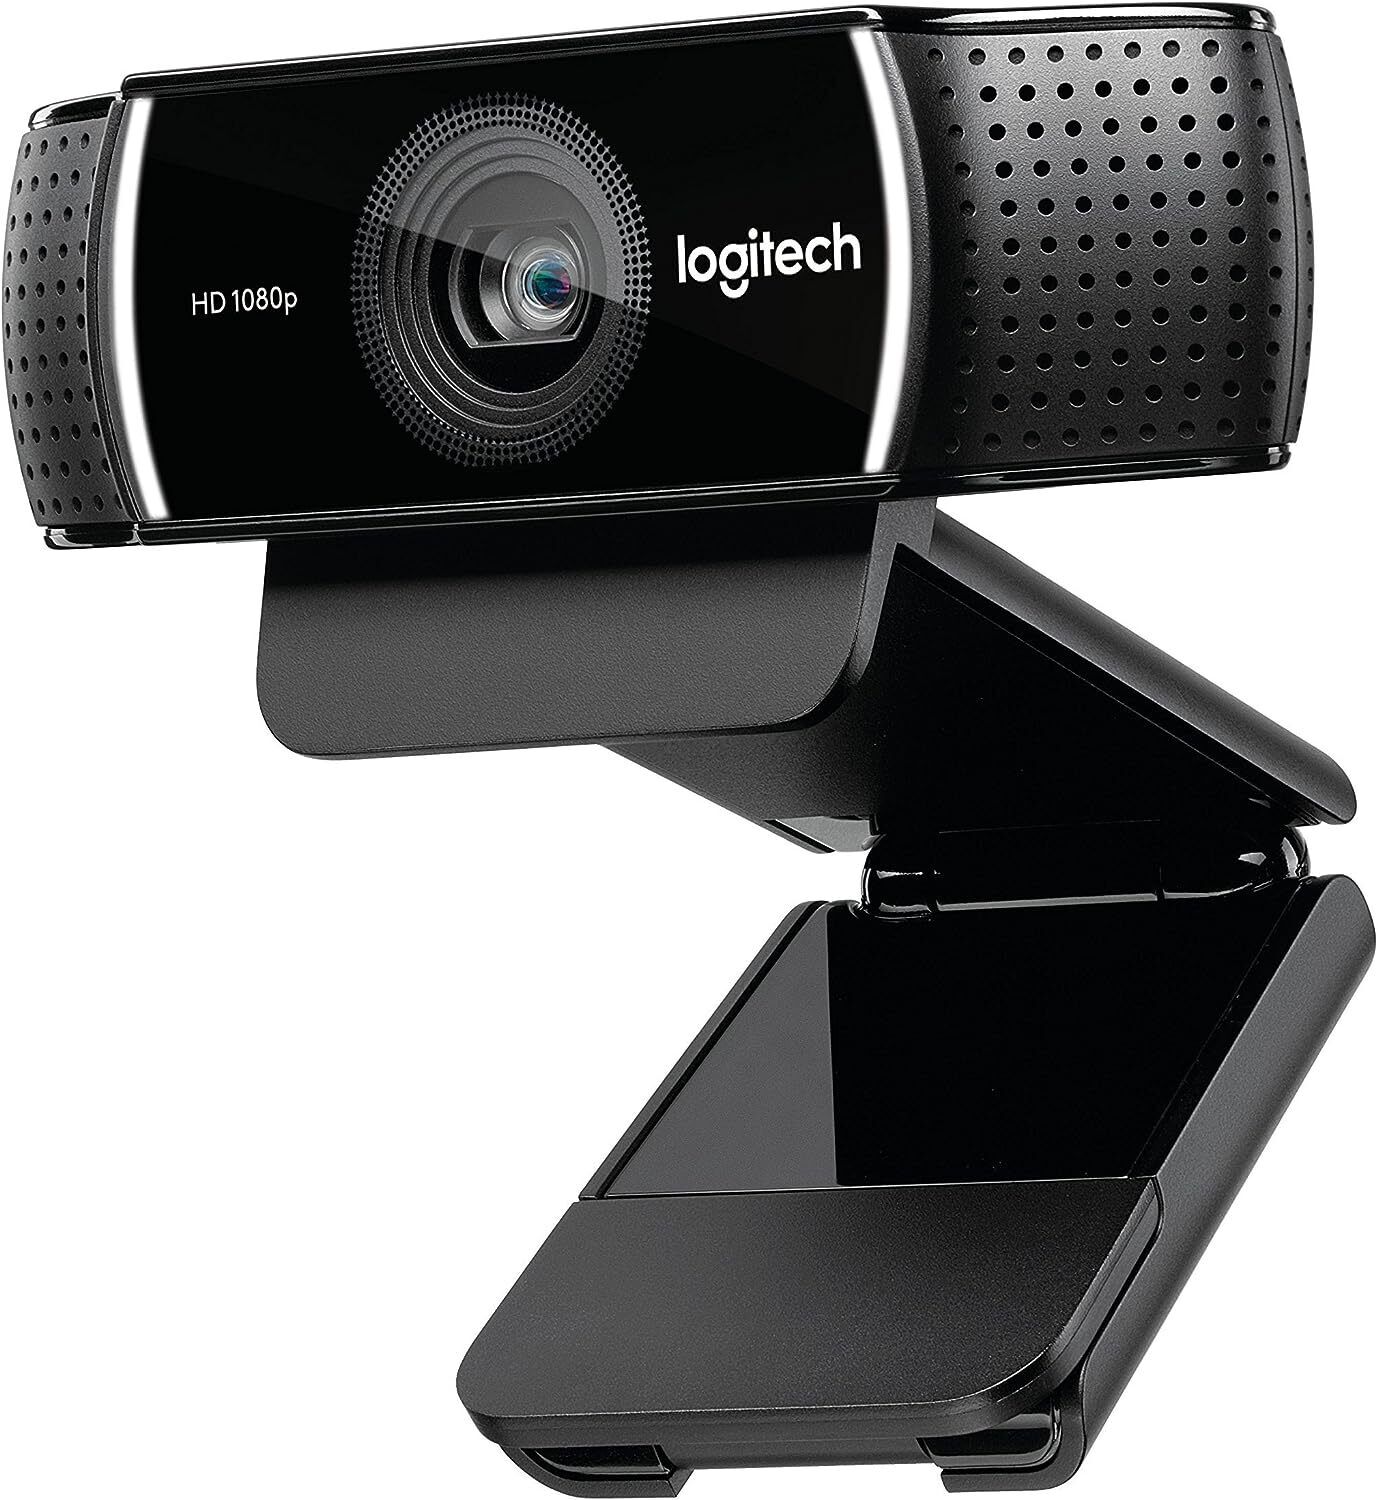 Logitech 1080p Pro Stream Webcam for HD Video Streaming and Recording at 1080p